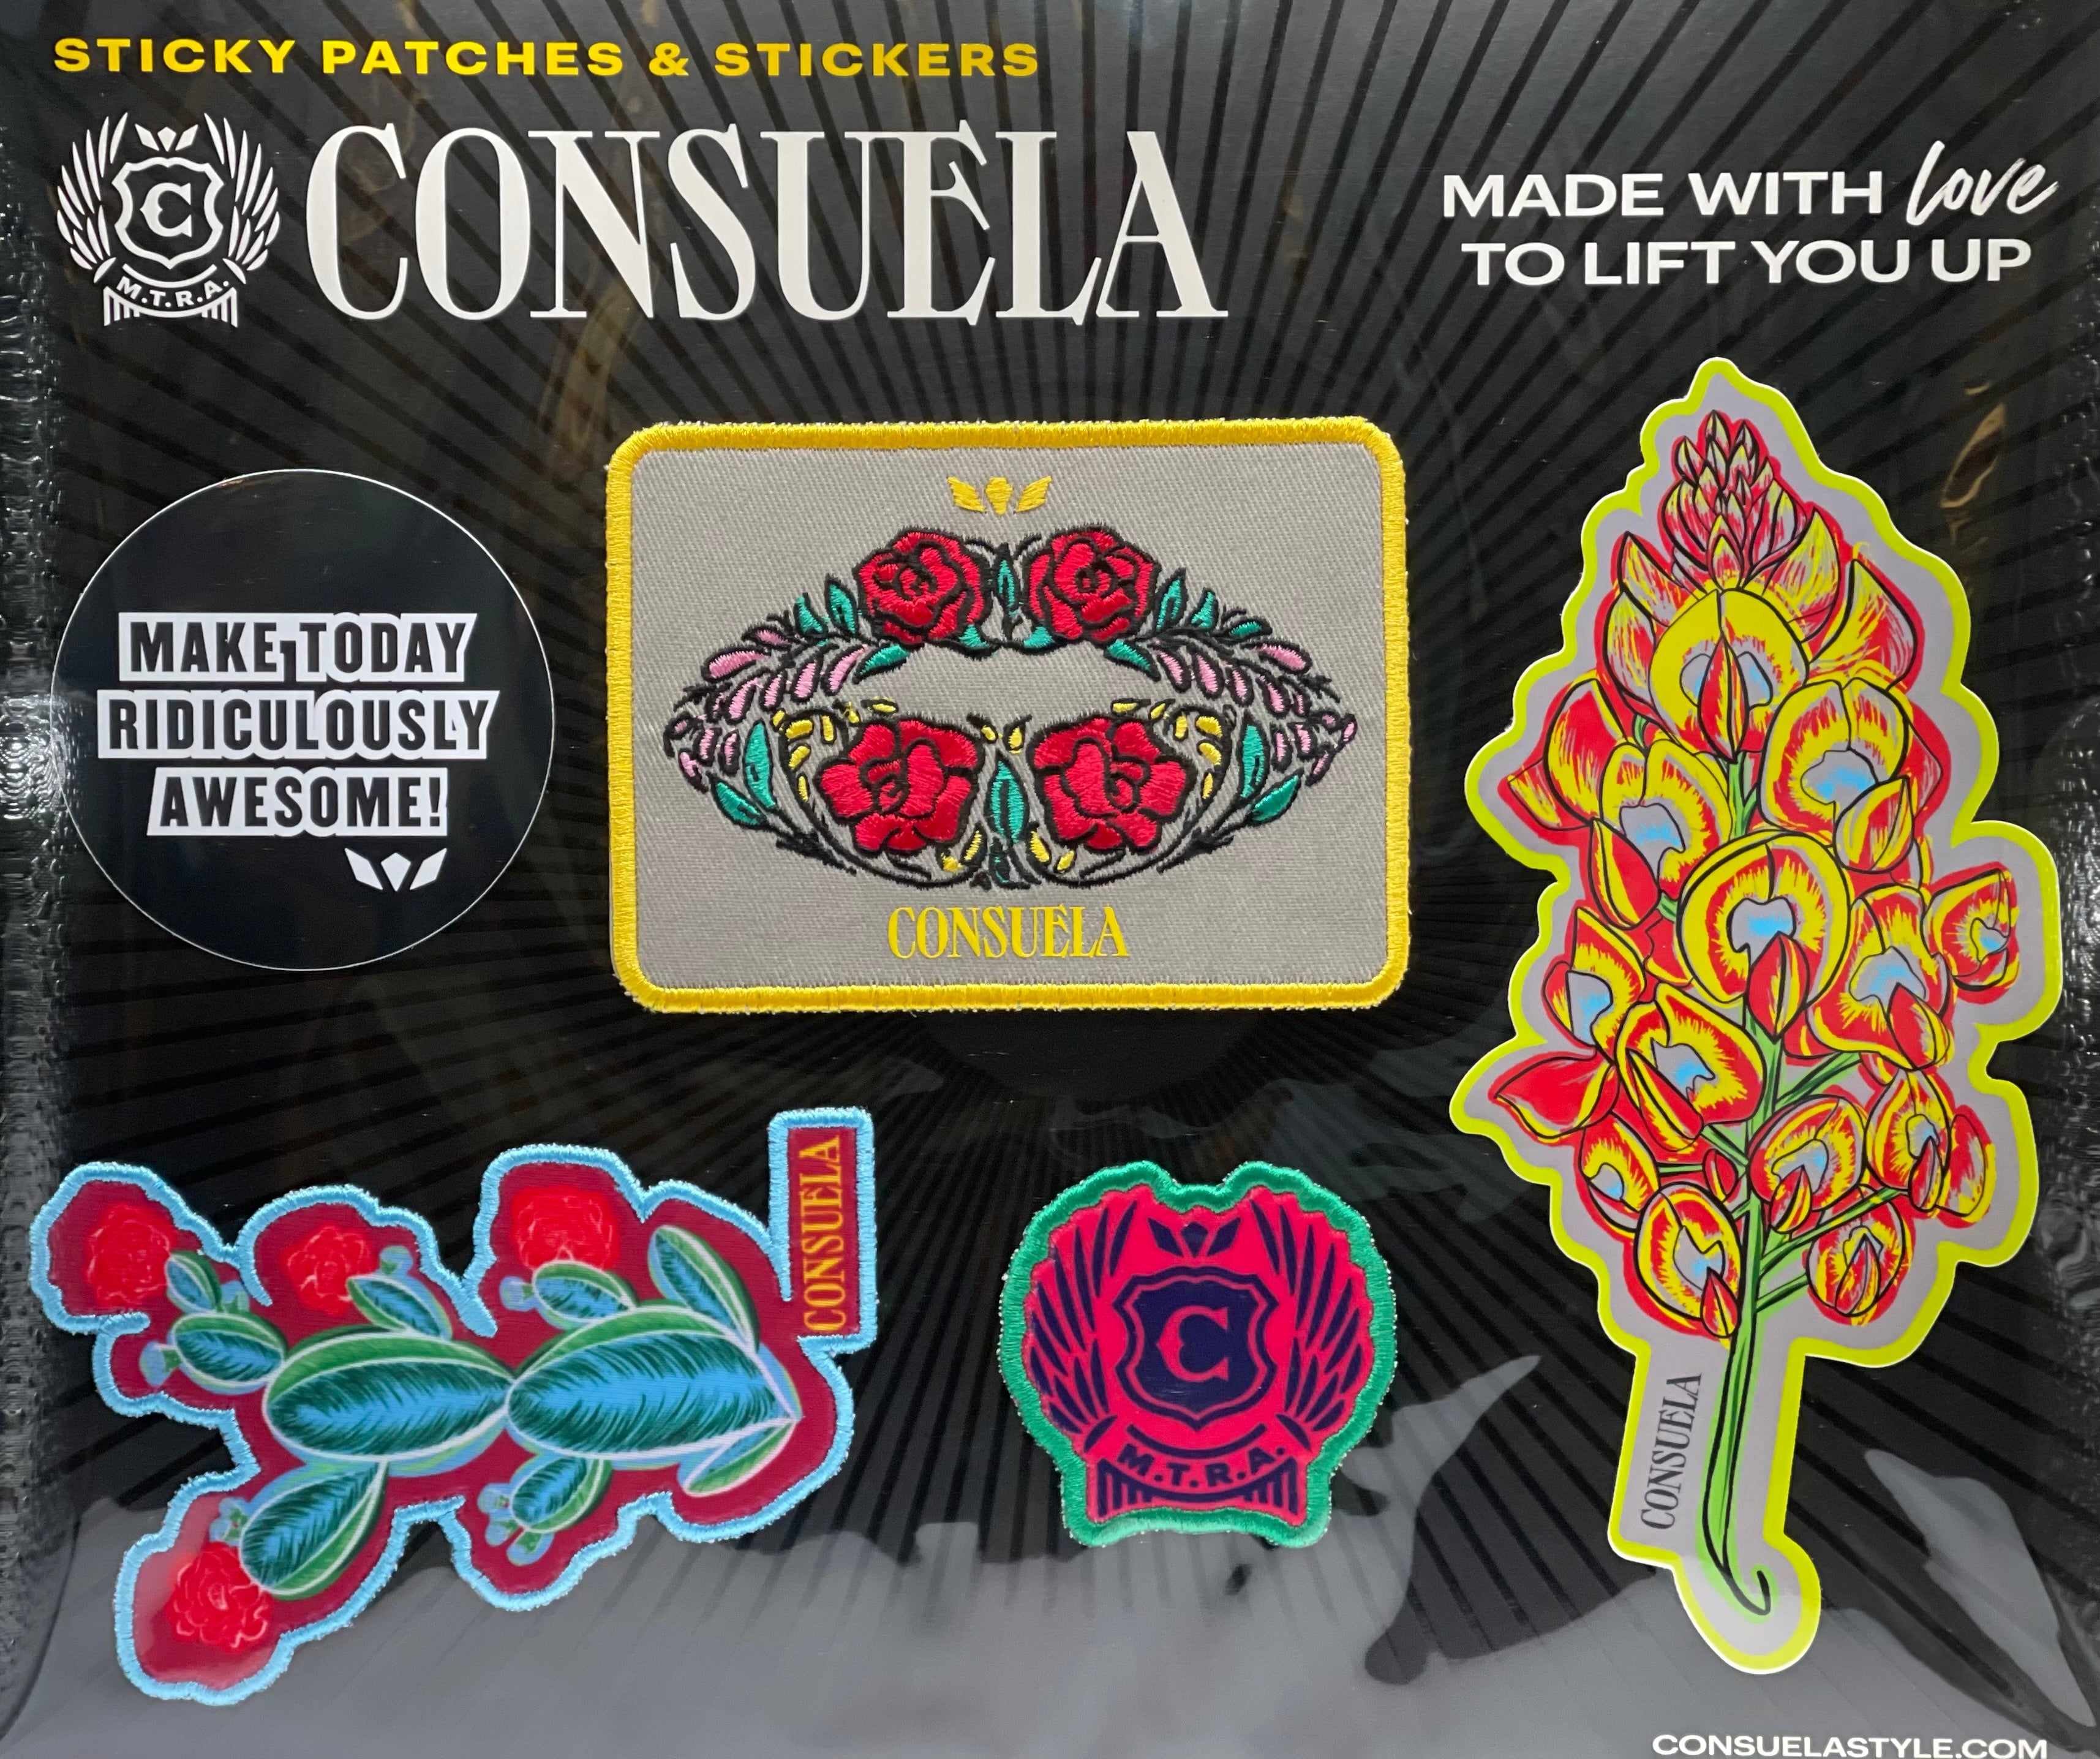 PATCH BOARD #9 (LIPS/VIVA BABE) - CONSUELA – Julien's a Lifestyle Store